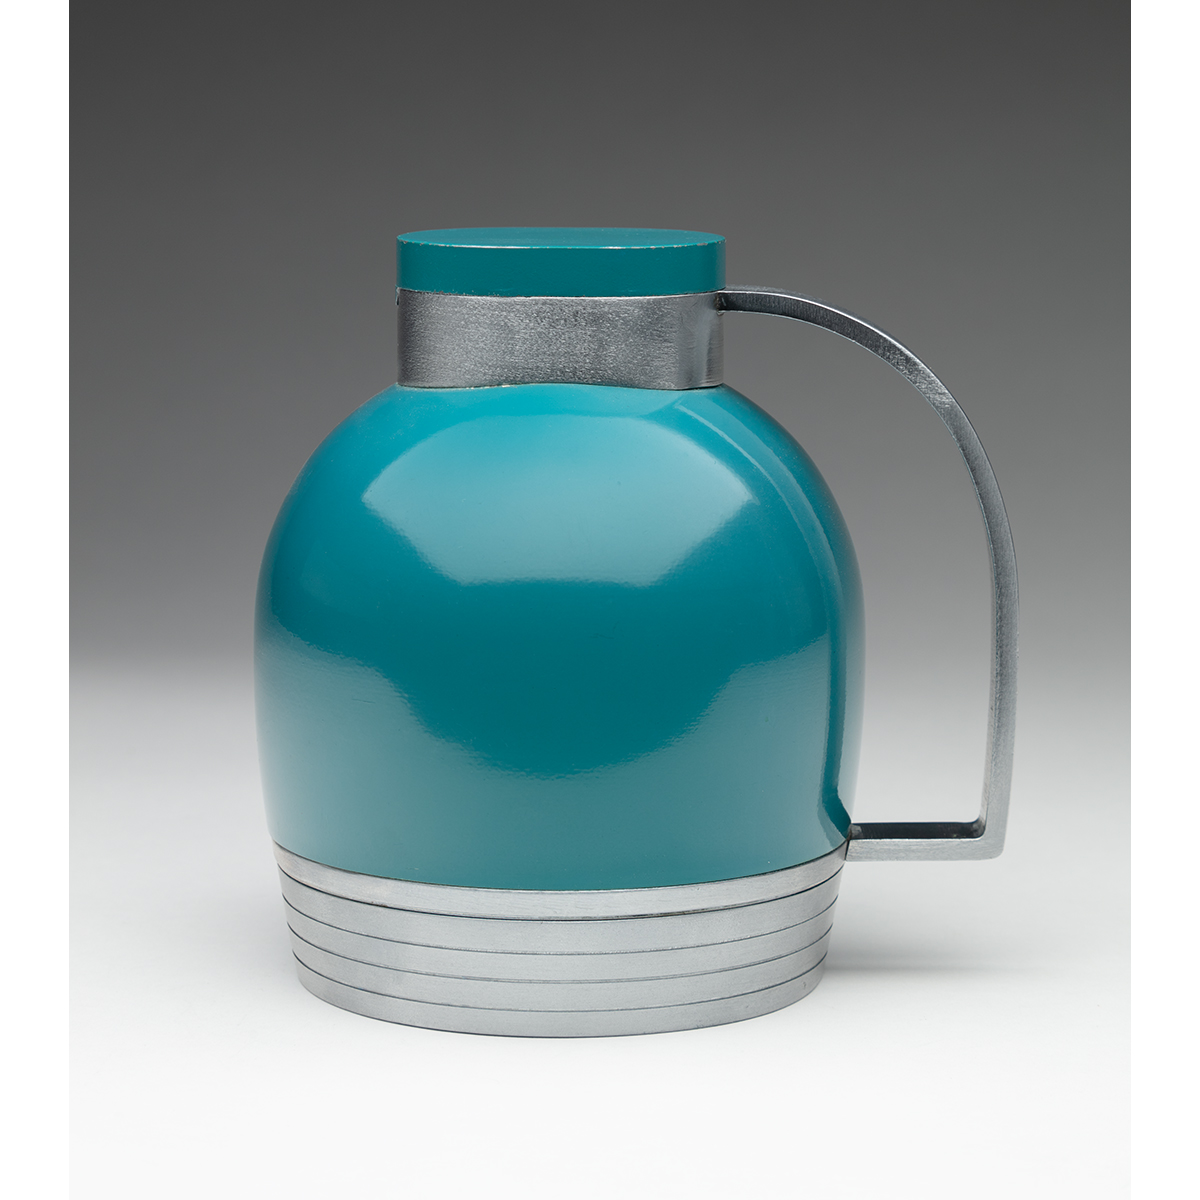 Henry Dreyfuss, Thermos carafe